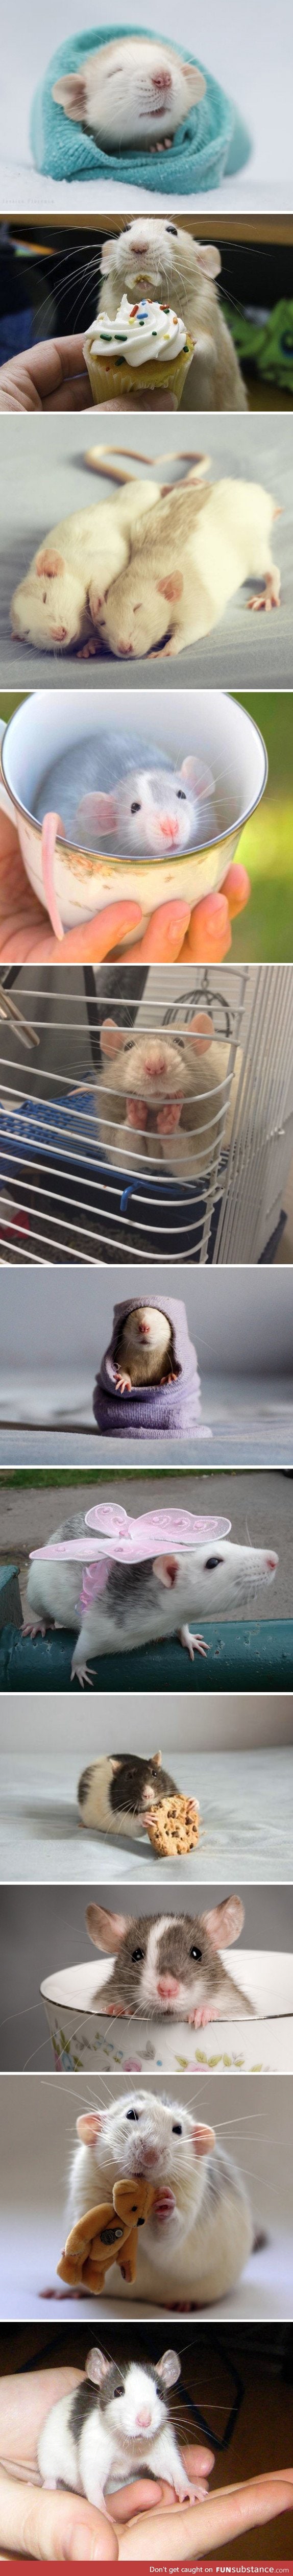 Who says that rats aren't cute? :)